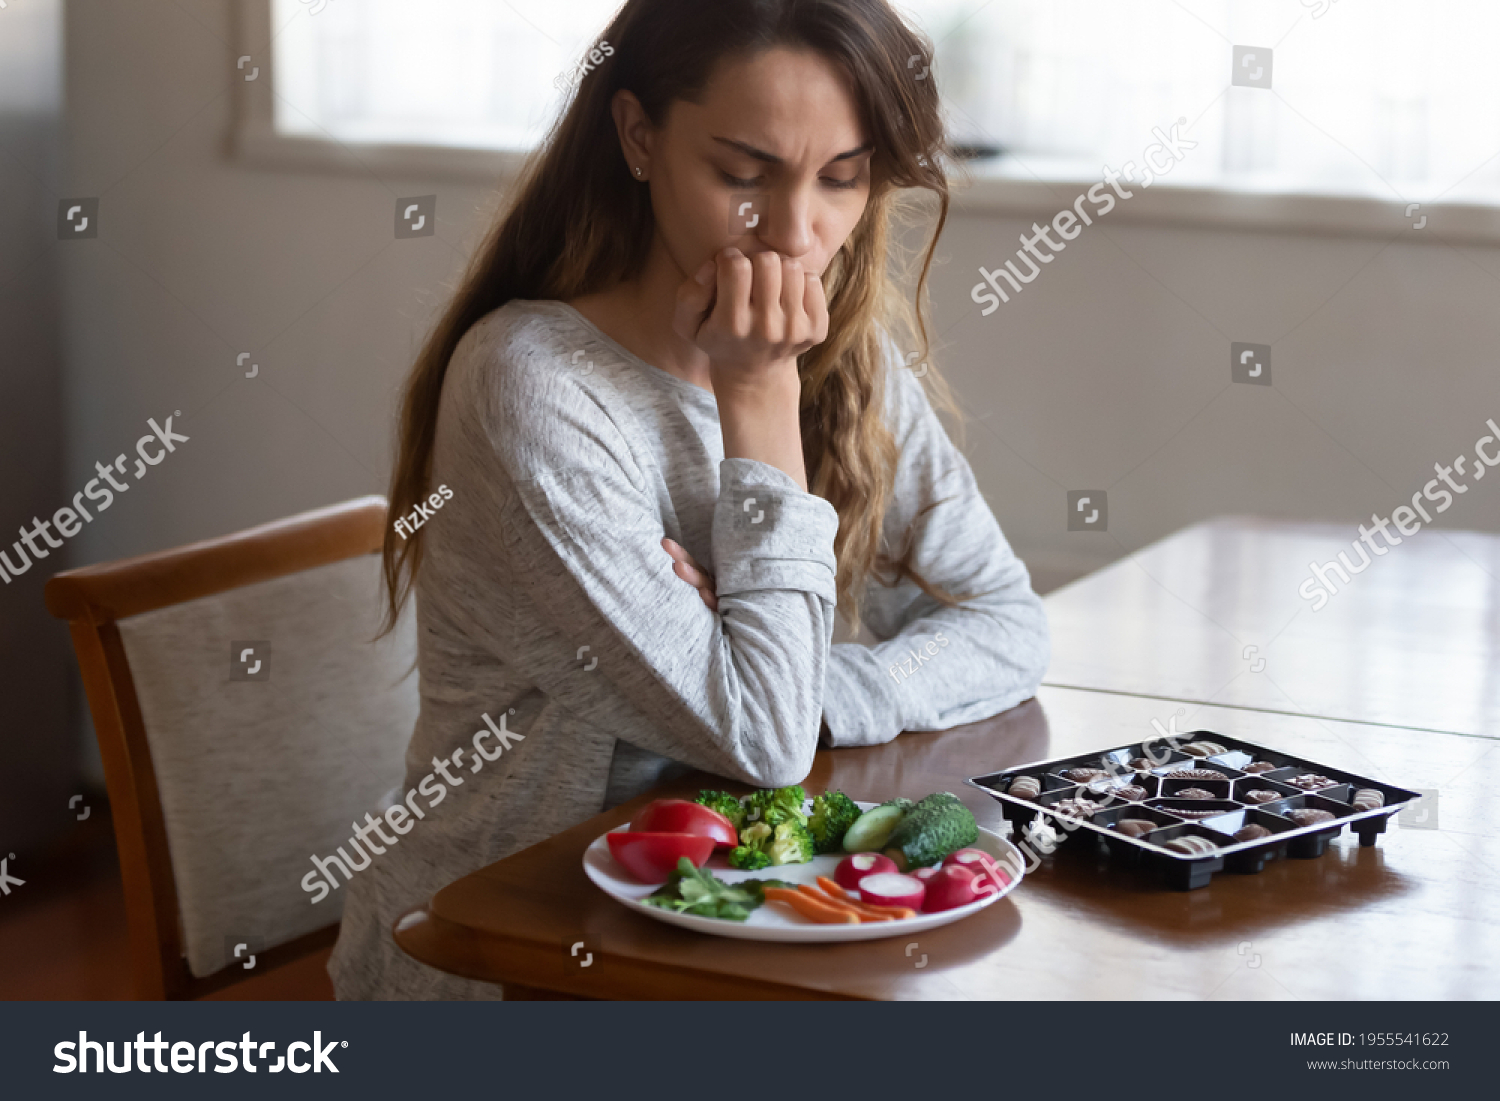 Unhappy young Latin woman look at chocolates and vegetables face temptation suffer from eating disorder. Millennial female think of healthy food choice, diet. Wellbeing, weight loss concept. #1955541622